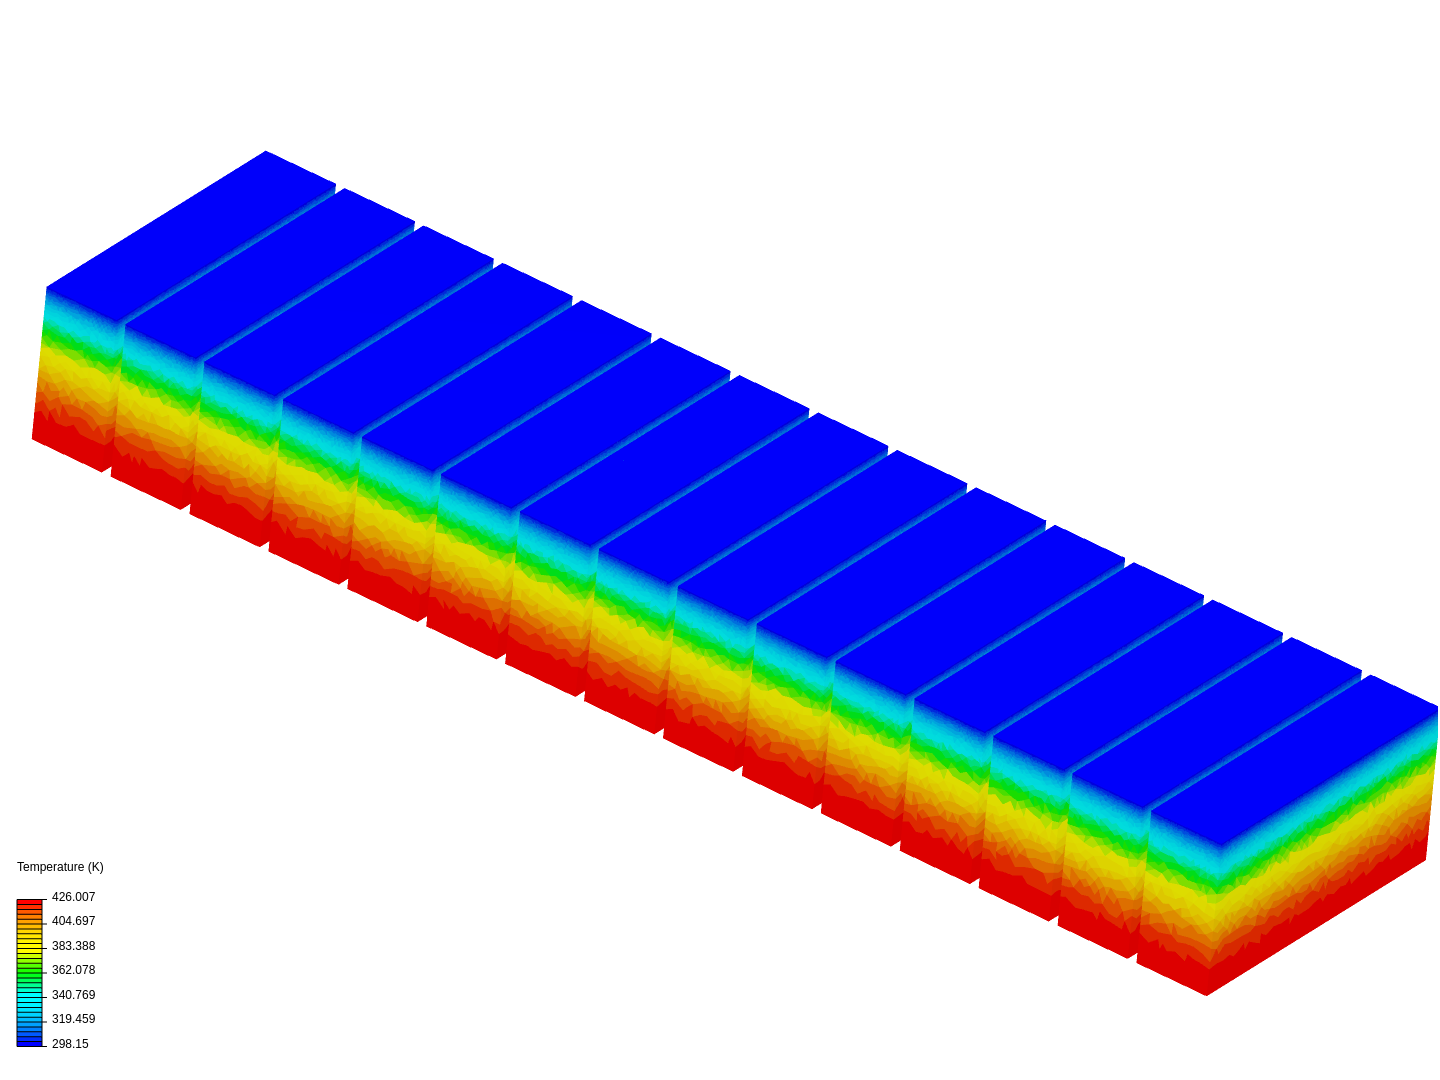 Simulation on Optimised Design, Coolant Channel Size 1mmx5mm, 7 Channels image